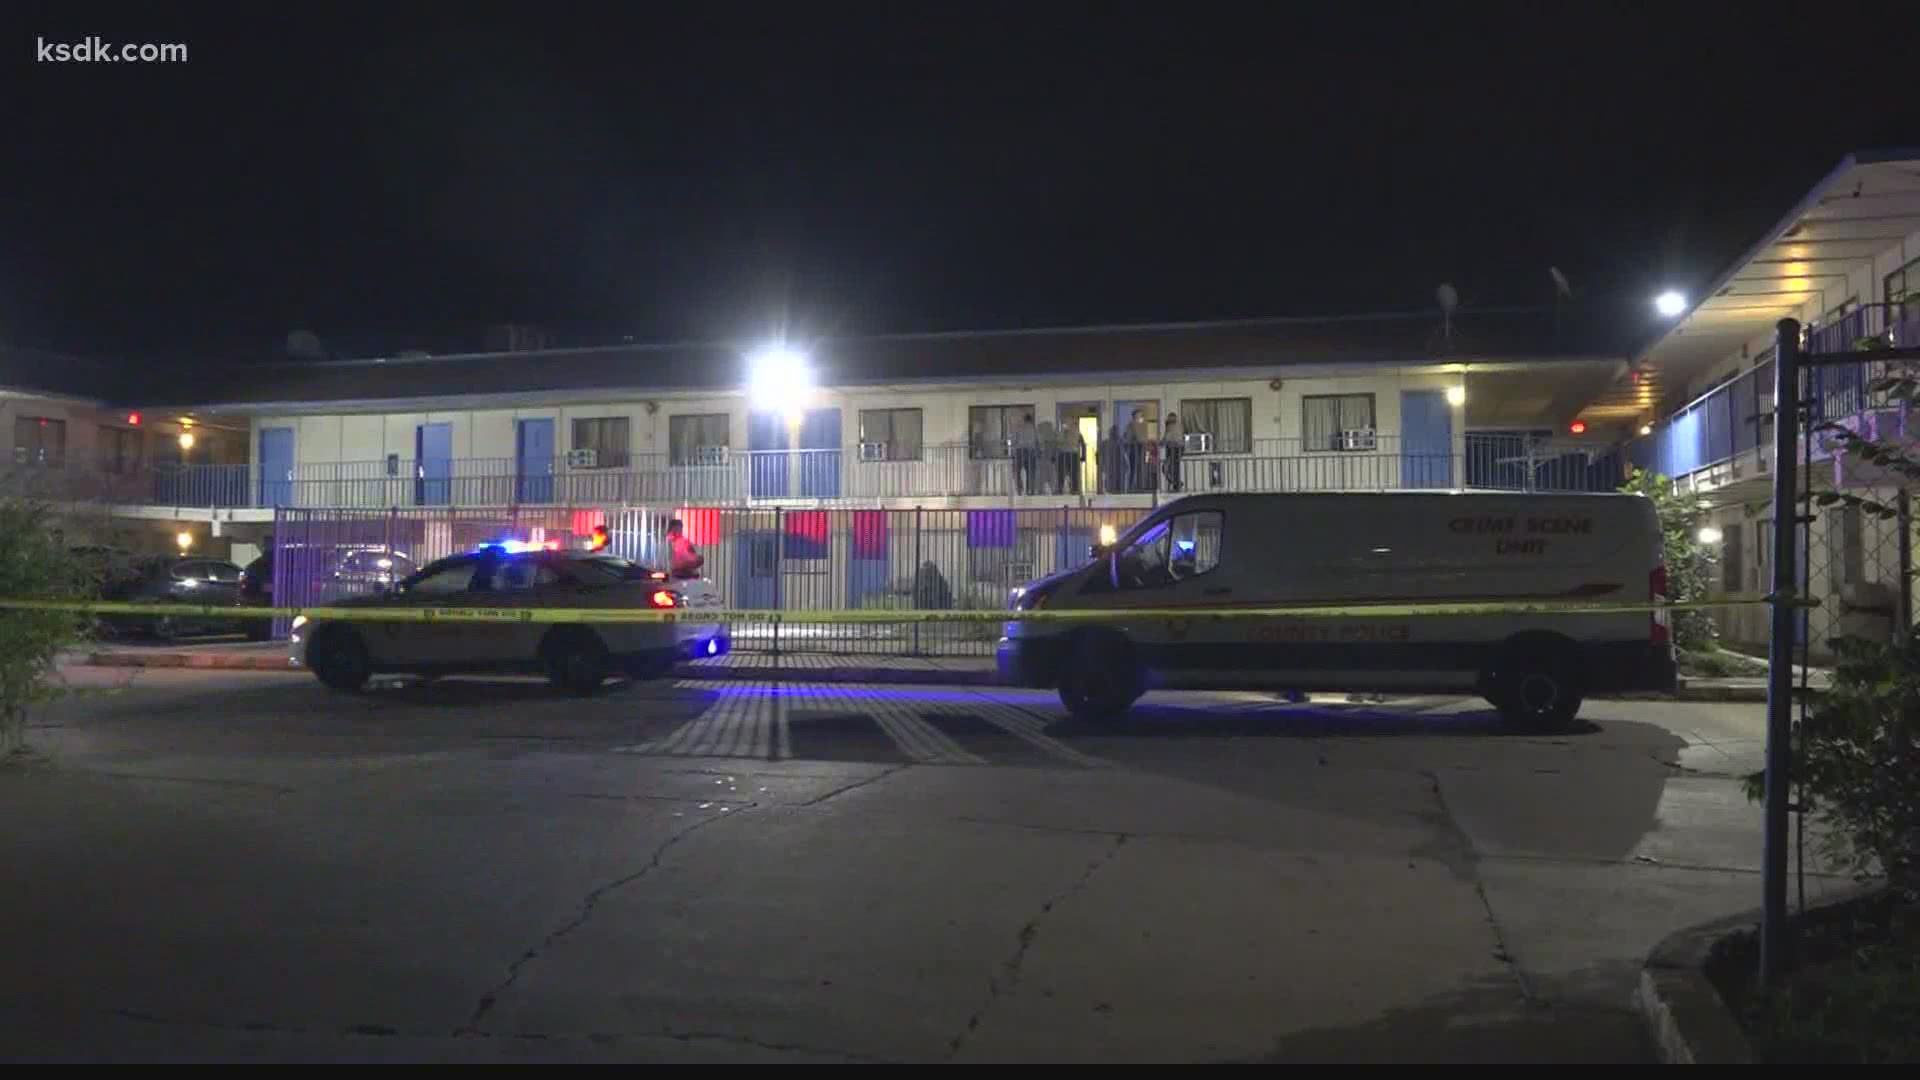 Early Monday, police responded to a call for shots fired at the Budget Inn on Dunn Road